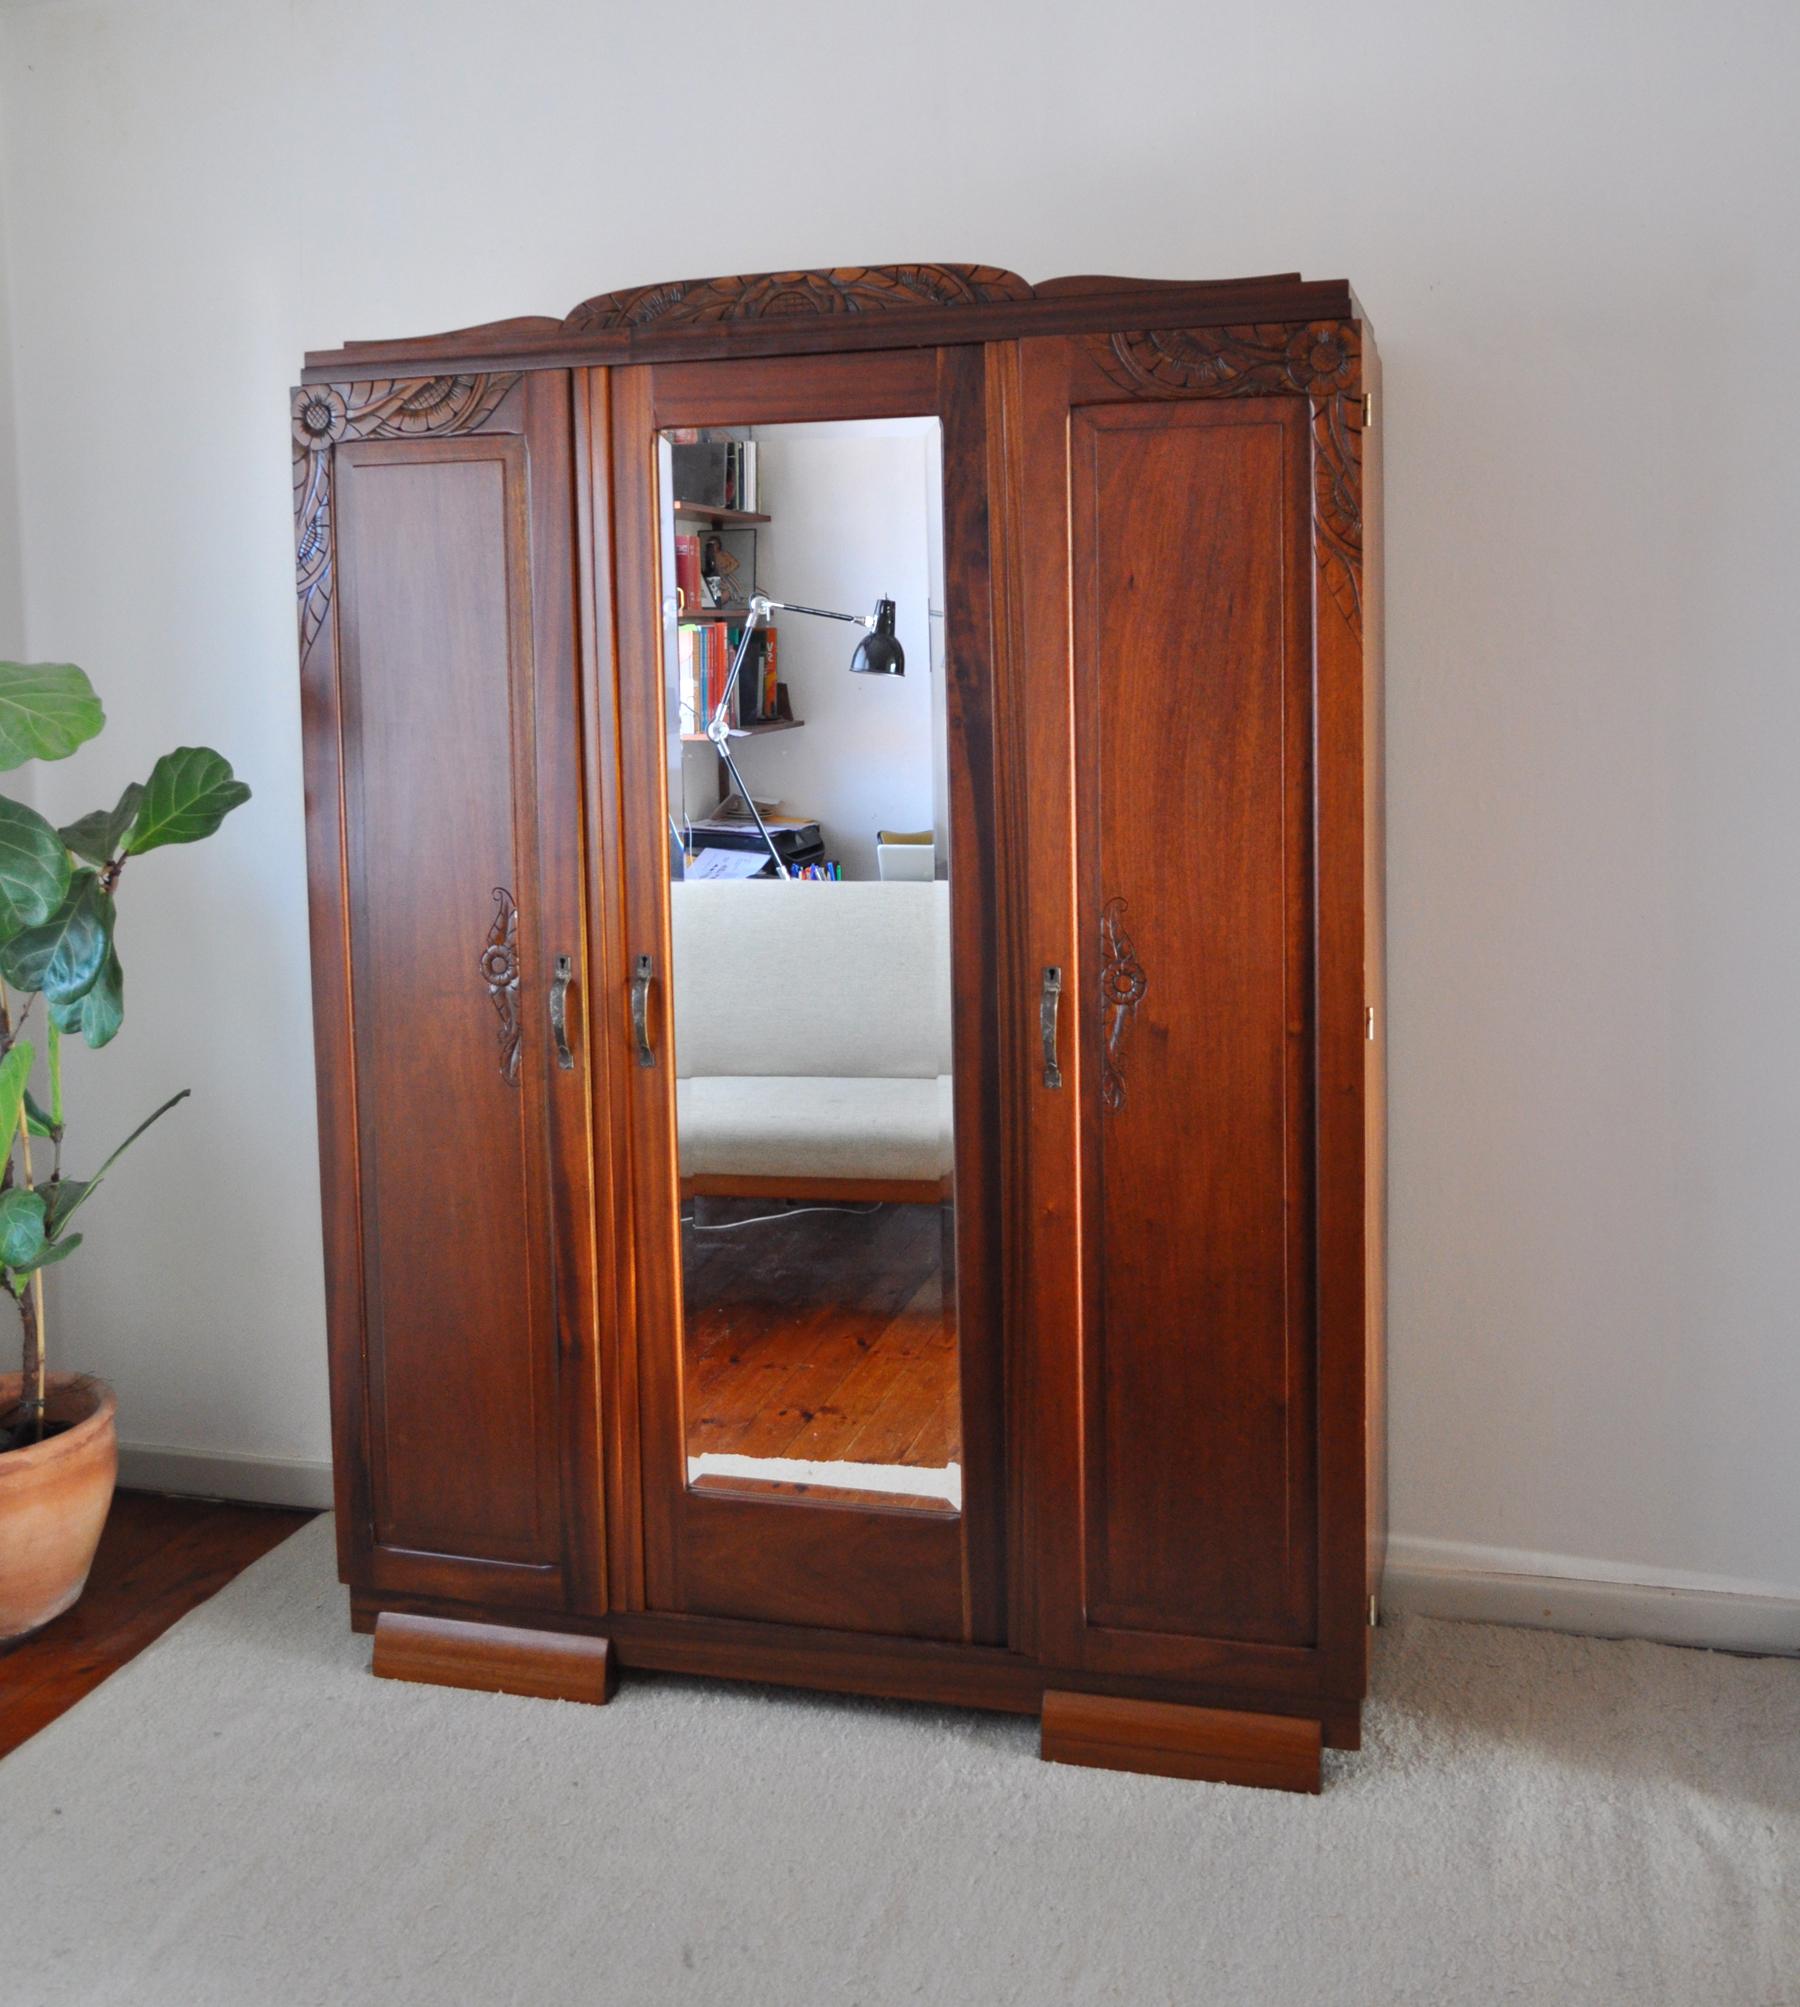 French Art Deco Three-Door Cabinet with Faceted Mirror In Good Condition For Sale In Vordingborg, DK